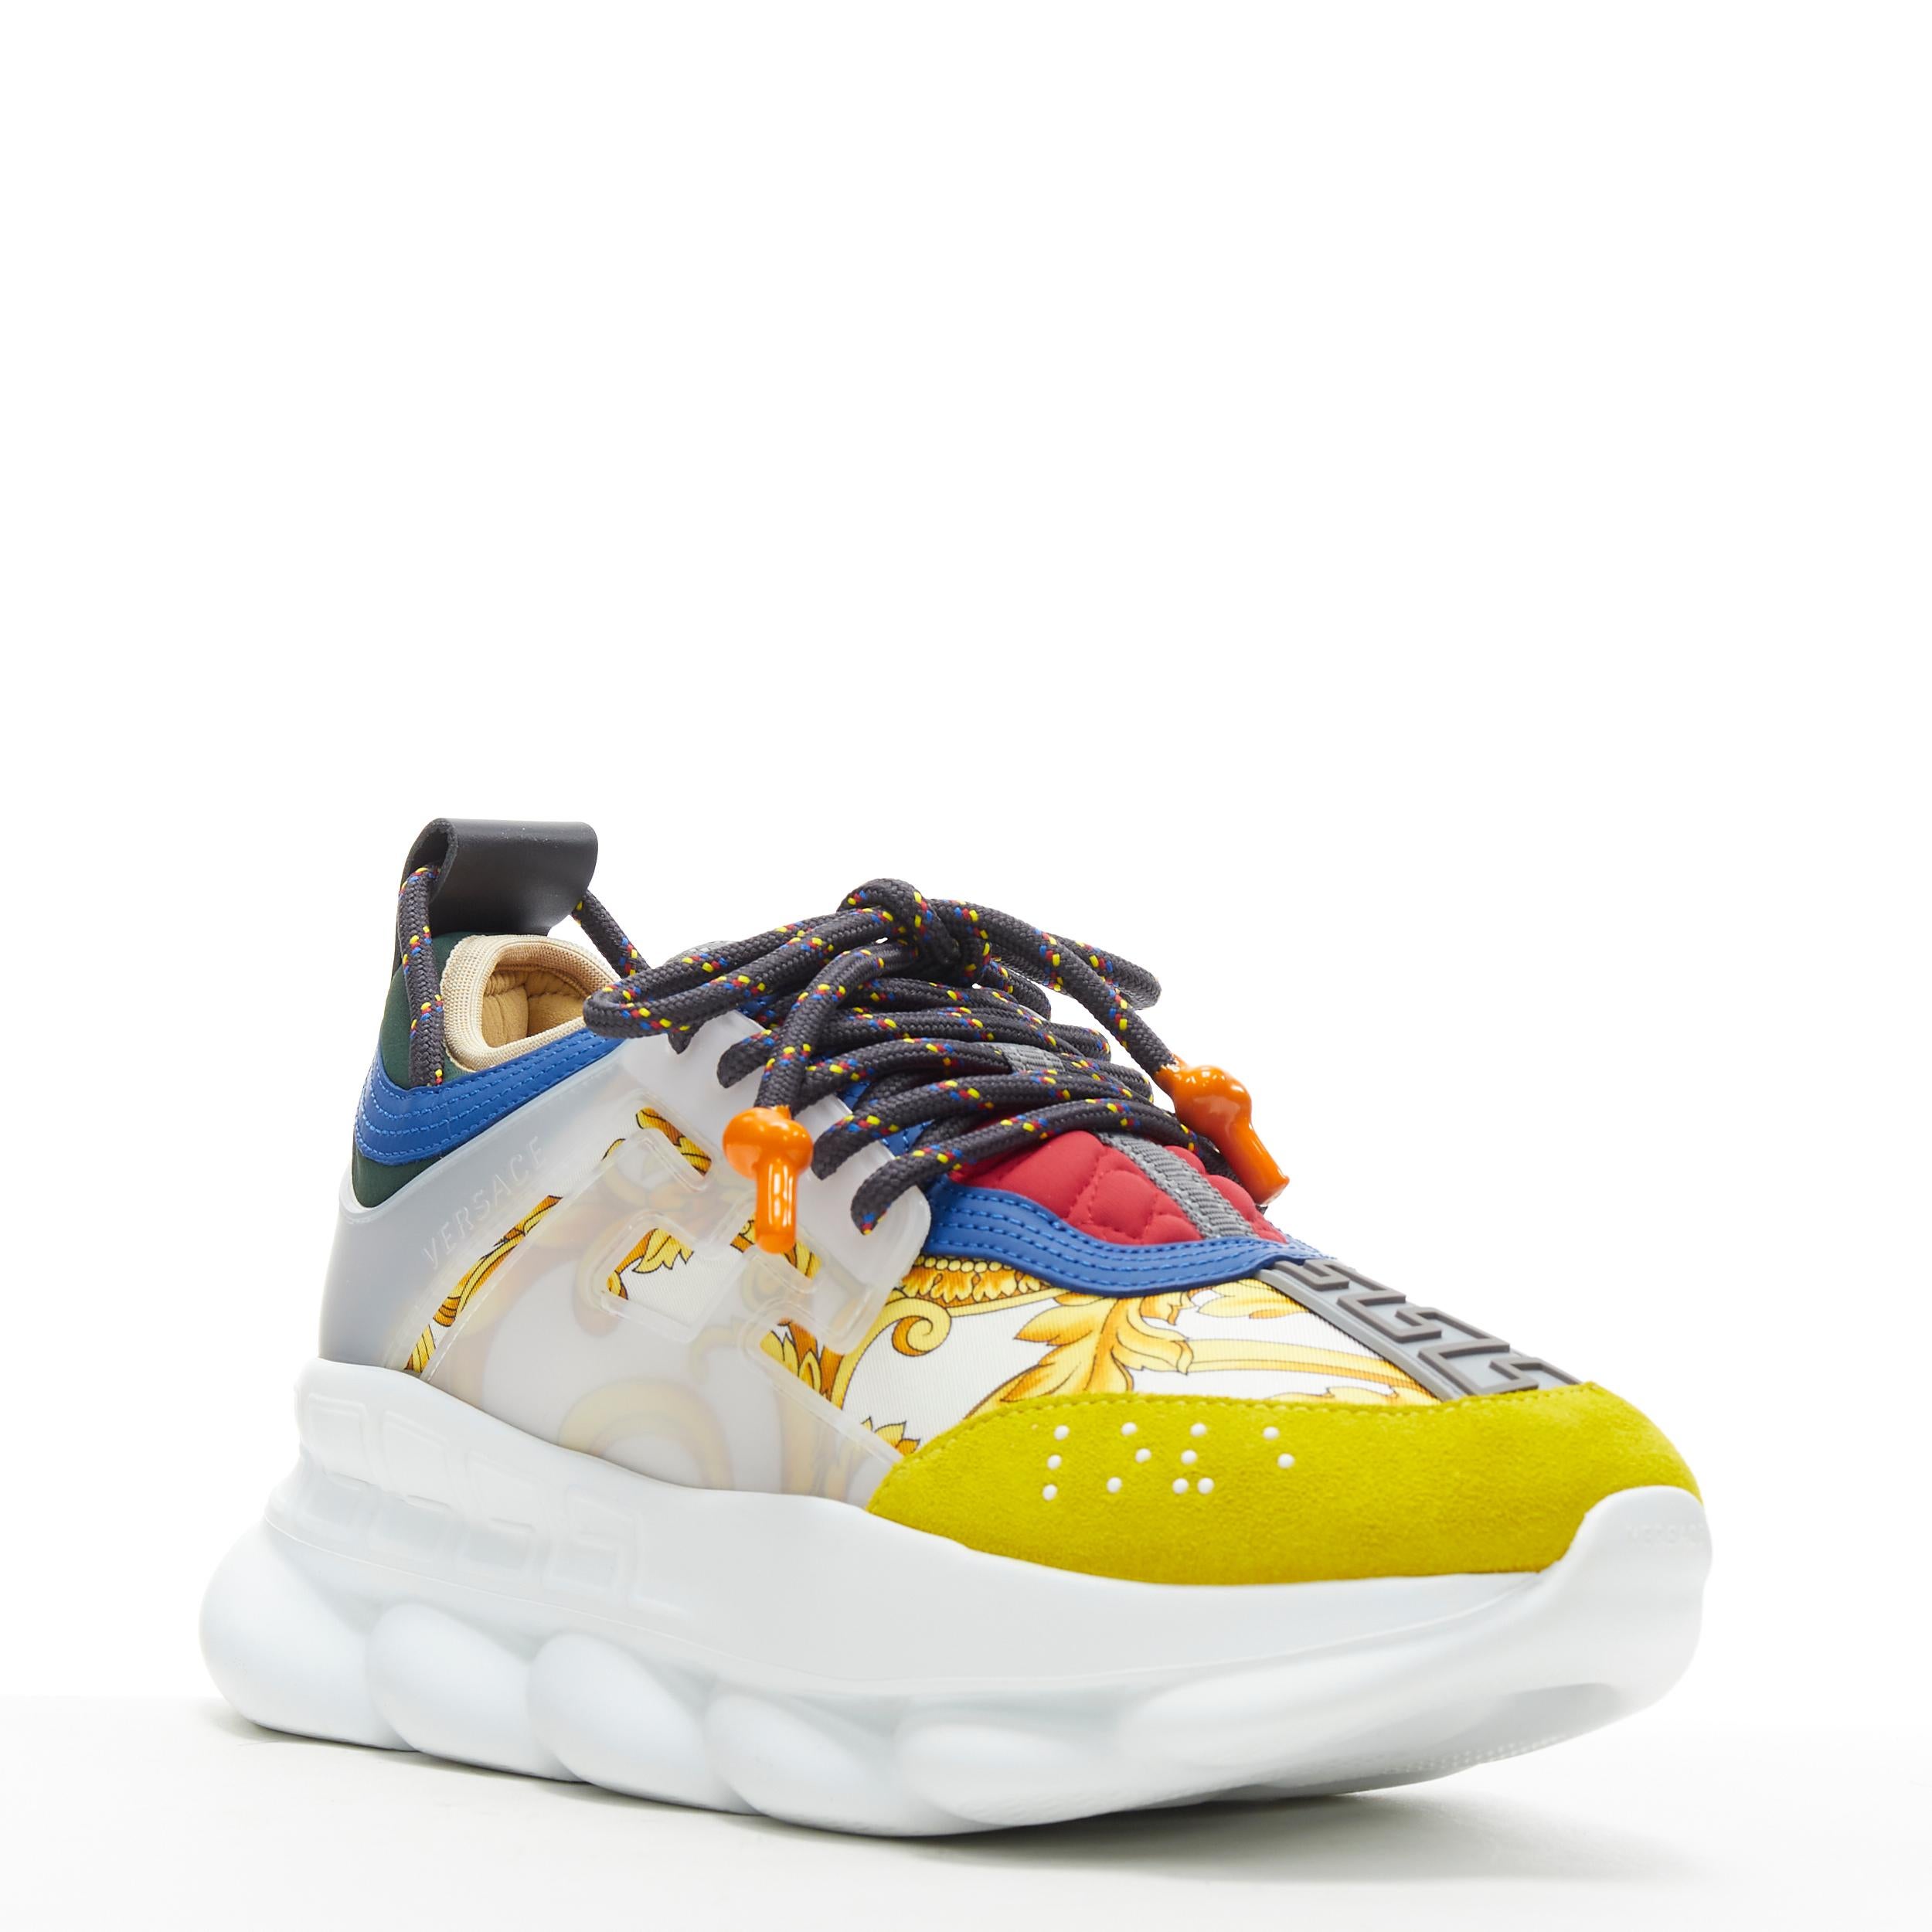 new VERSACE Chain Reaction gold barocco twill yellow blue suede sneaker EU40 US7 
Reference: TGAS/B00764 
Brand: Versace-Versace 
Designer: Salehe Bembury-Salehe Bembury 
Model: Versace Chain Reaction 
Material: Fabric 
Color: Gold 
Pattern: Solid